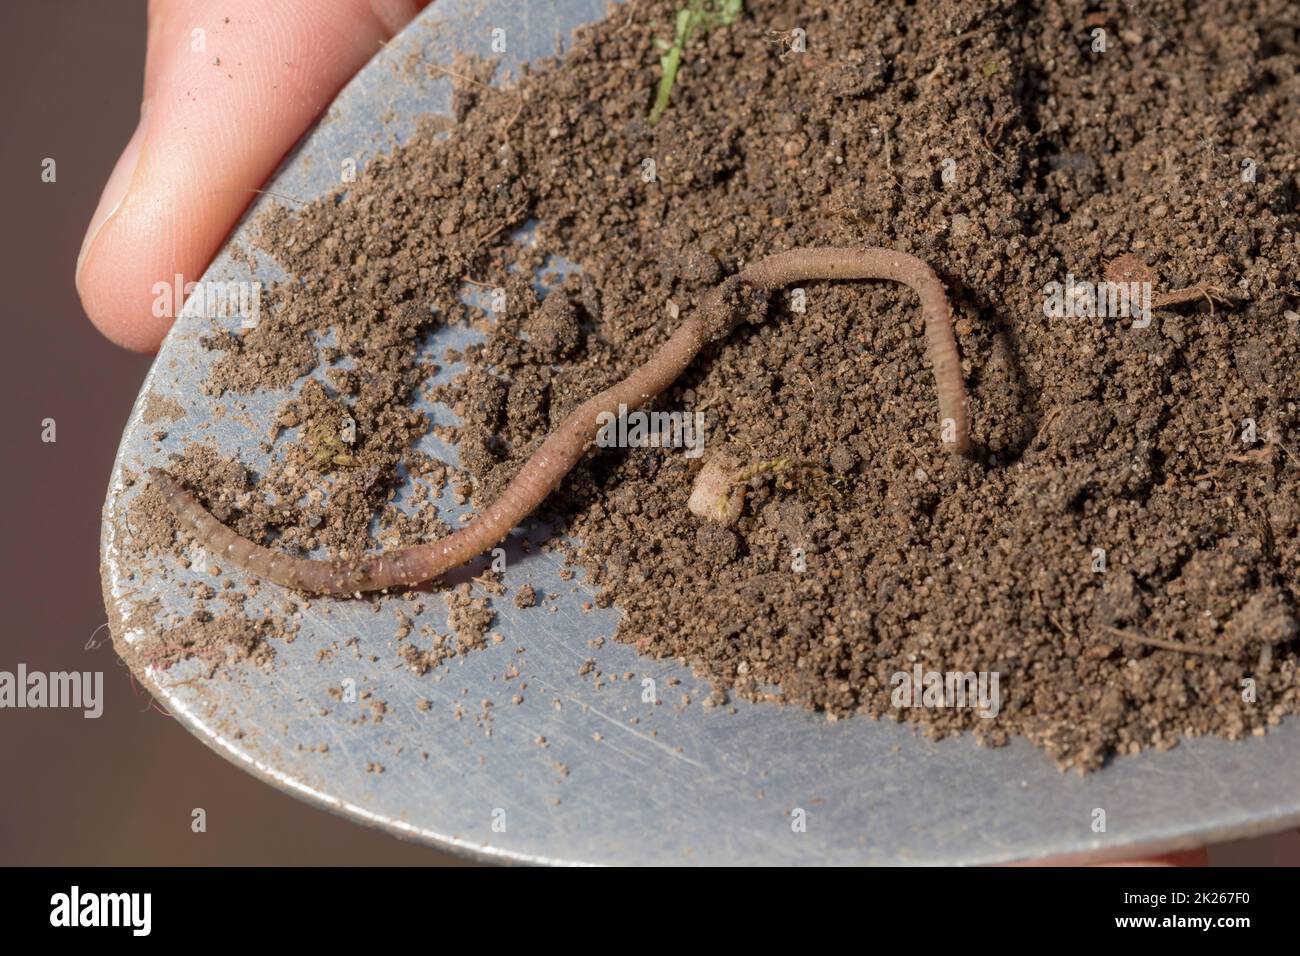 An earthworm crawls on a scoop of soil Stock Photo